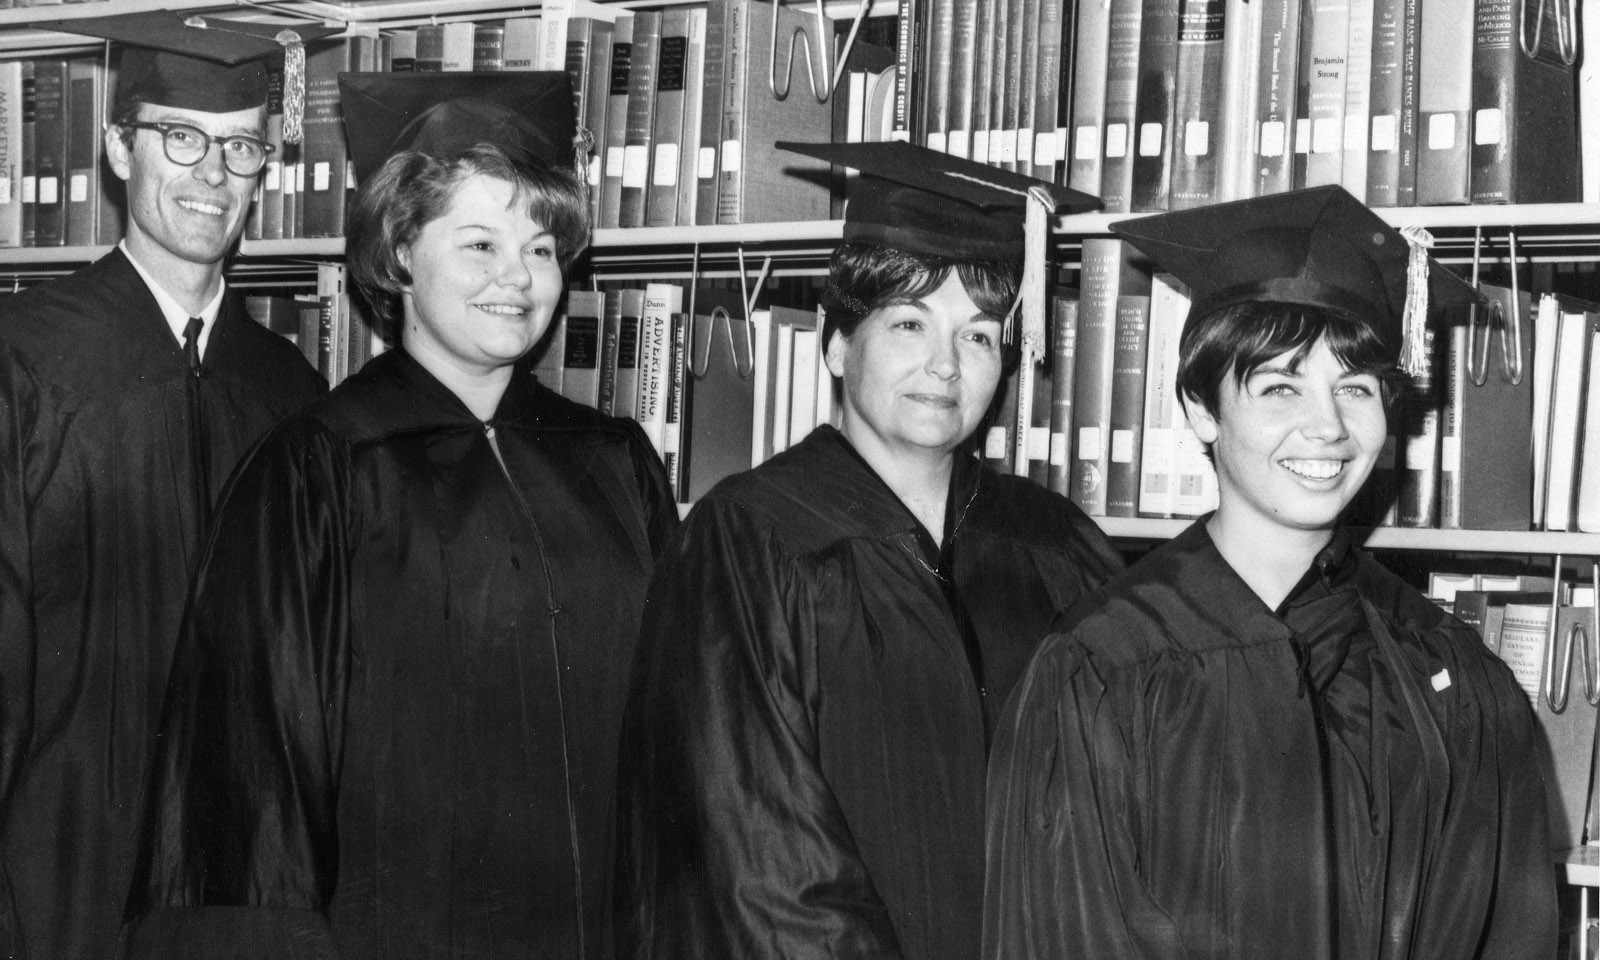 The first four graduates of CSUDH stand in the campus library, June 9, 1967. (left to right) William Hart, Pamela Striplin, Othi